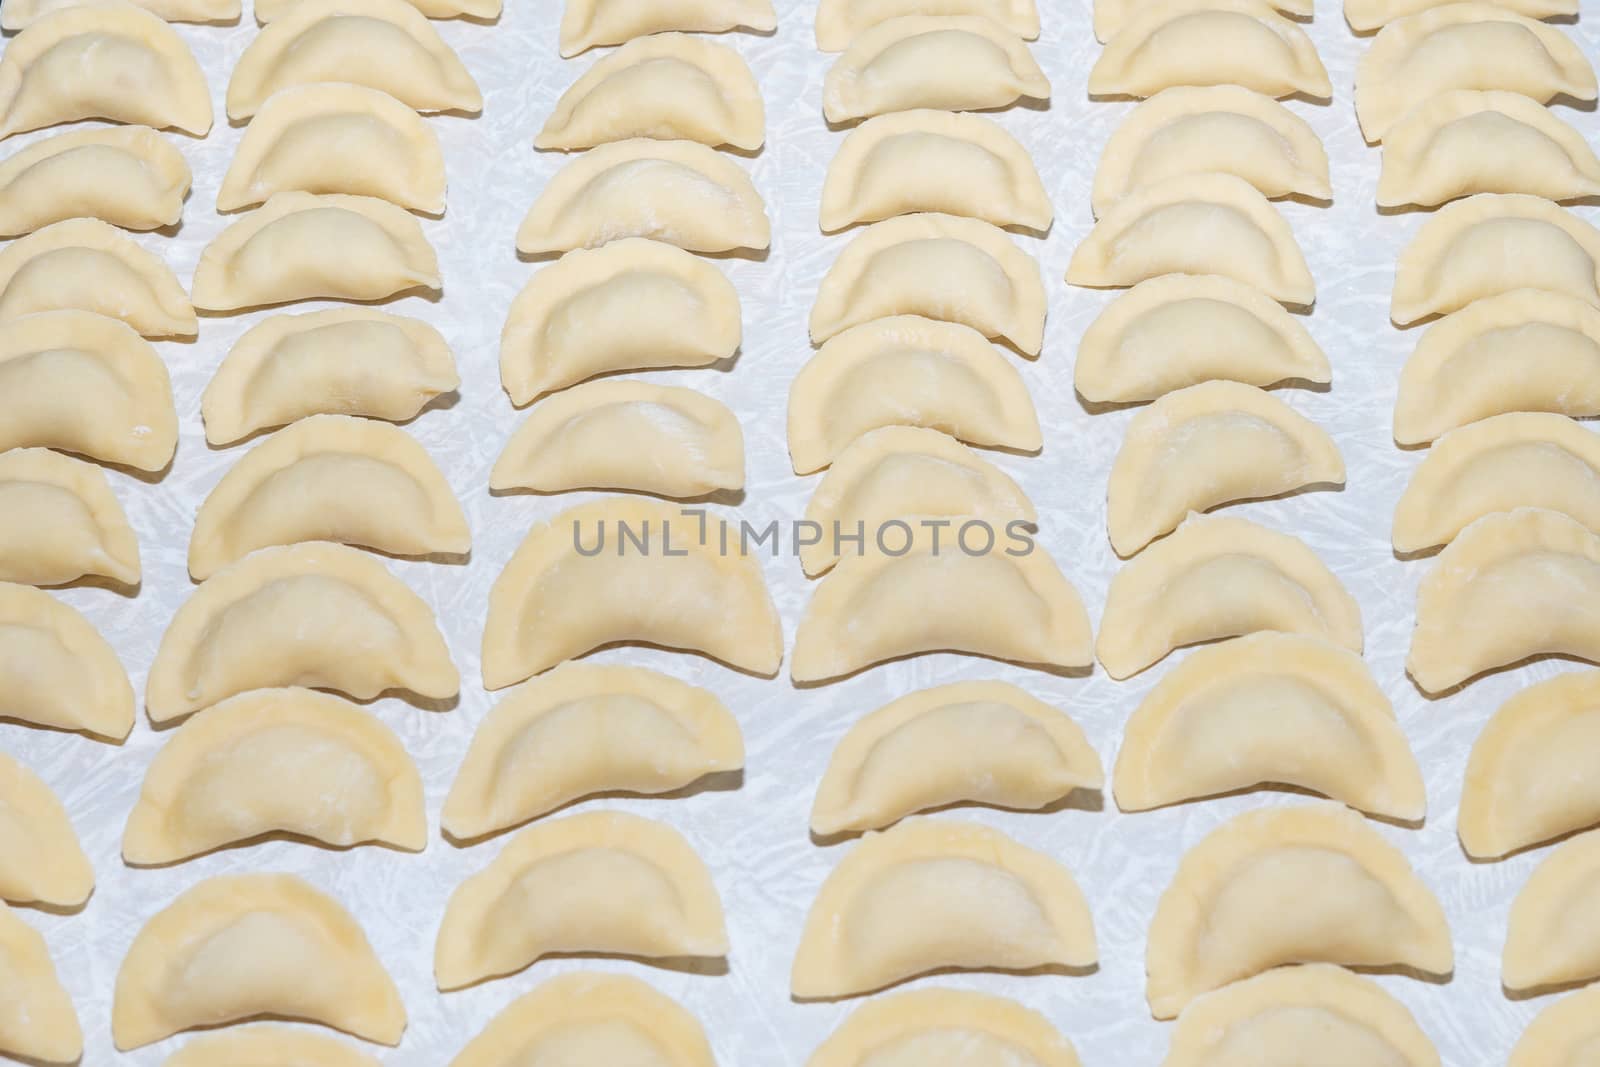 homemade delicious handmade dumplings are dusted with flour and await cooking